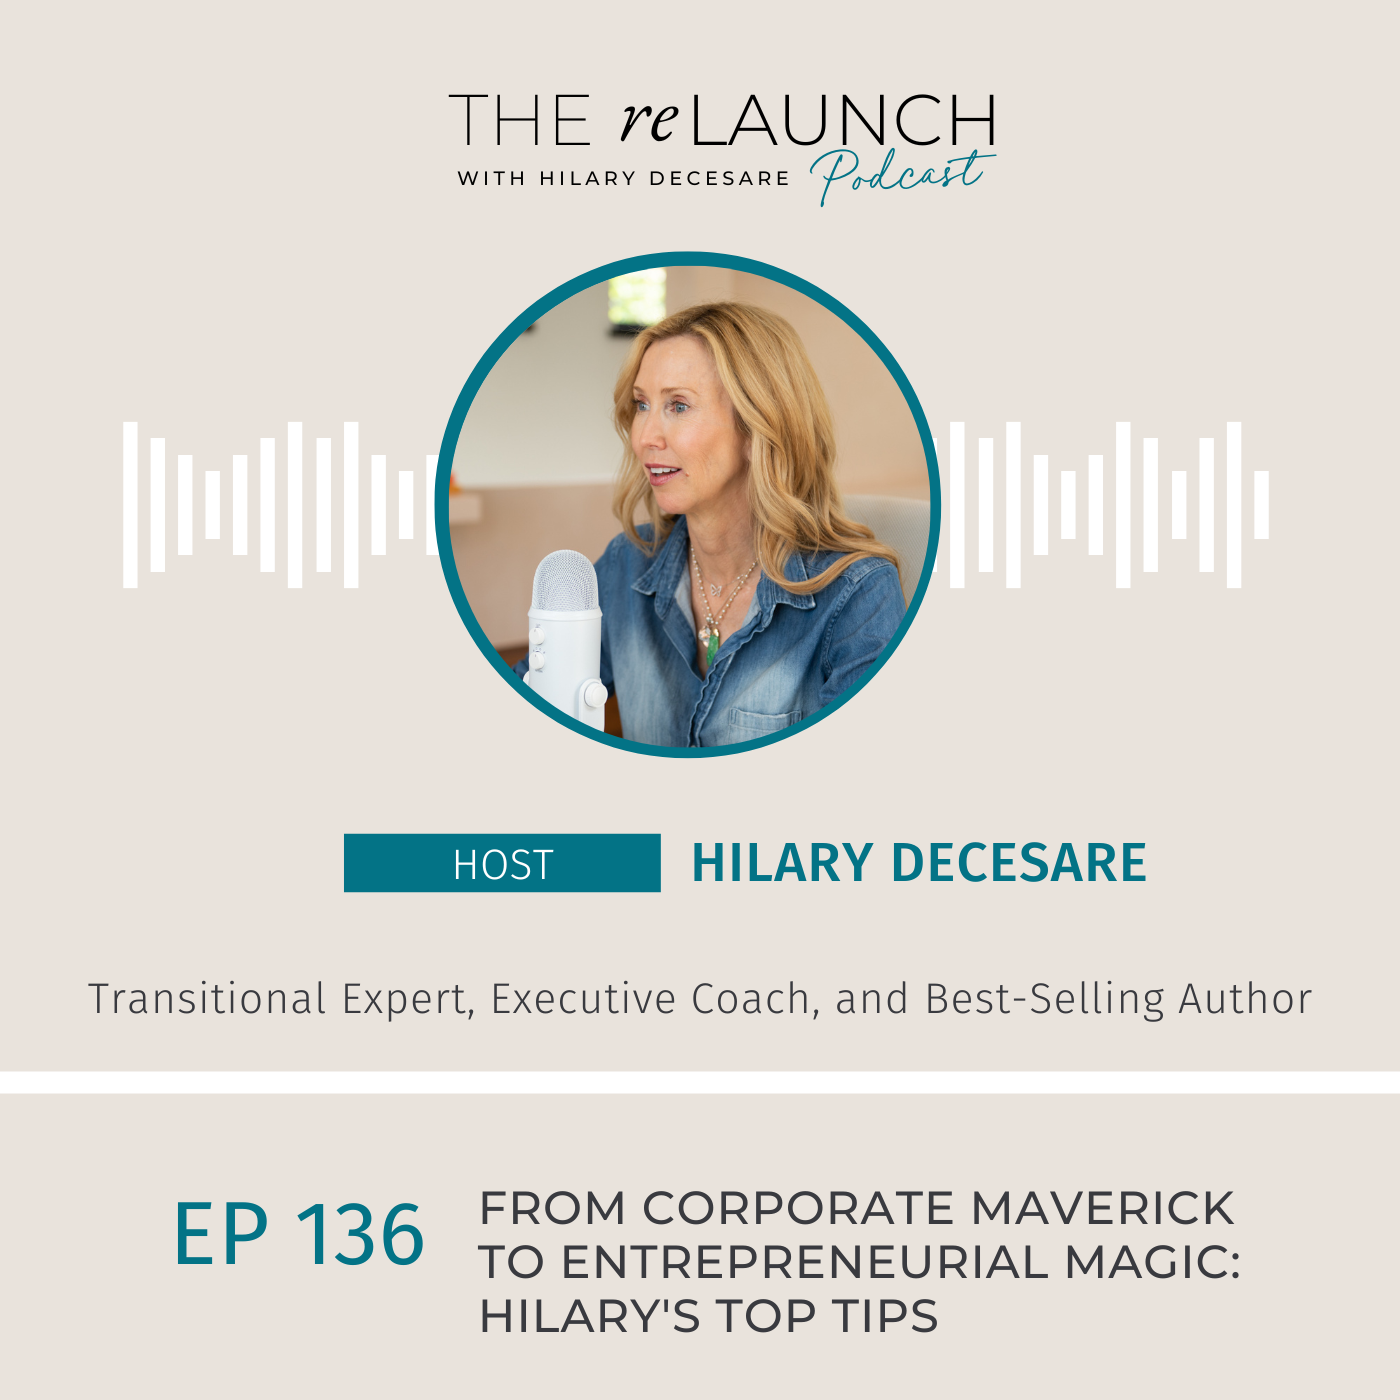 From Corporate Maverick to Entrepreneurial Magic: Hilary's Top Tips